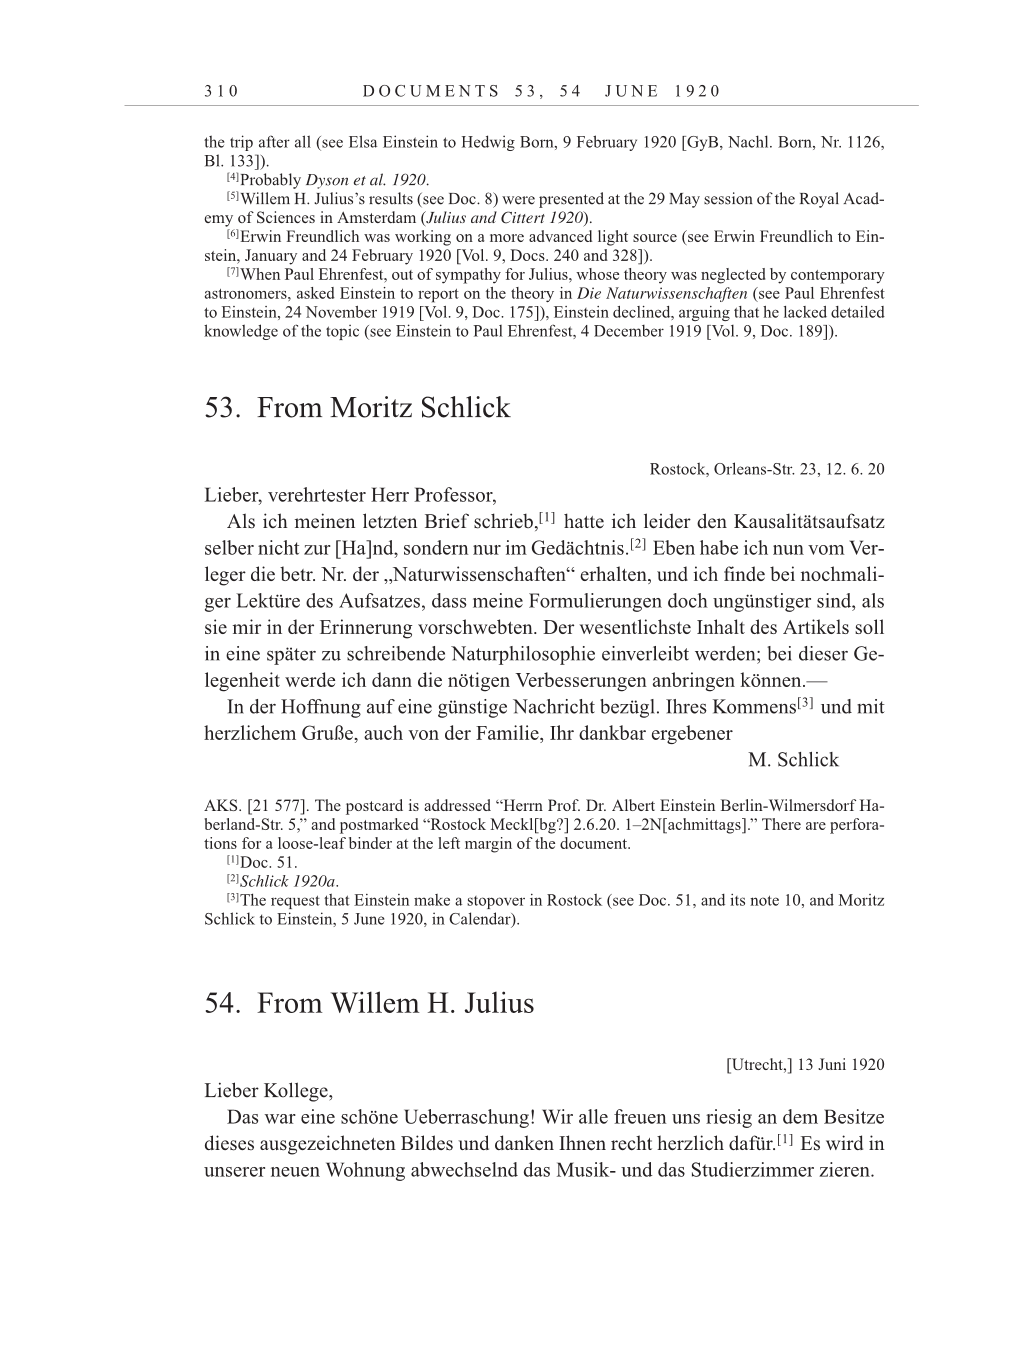 Volume 10: The Berlin Years: Correspondence May-December 1920 / Supplementary Correspondence 1909-1920 page 310